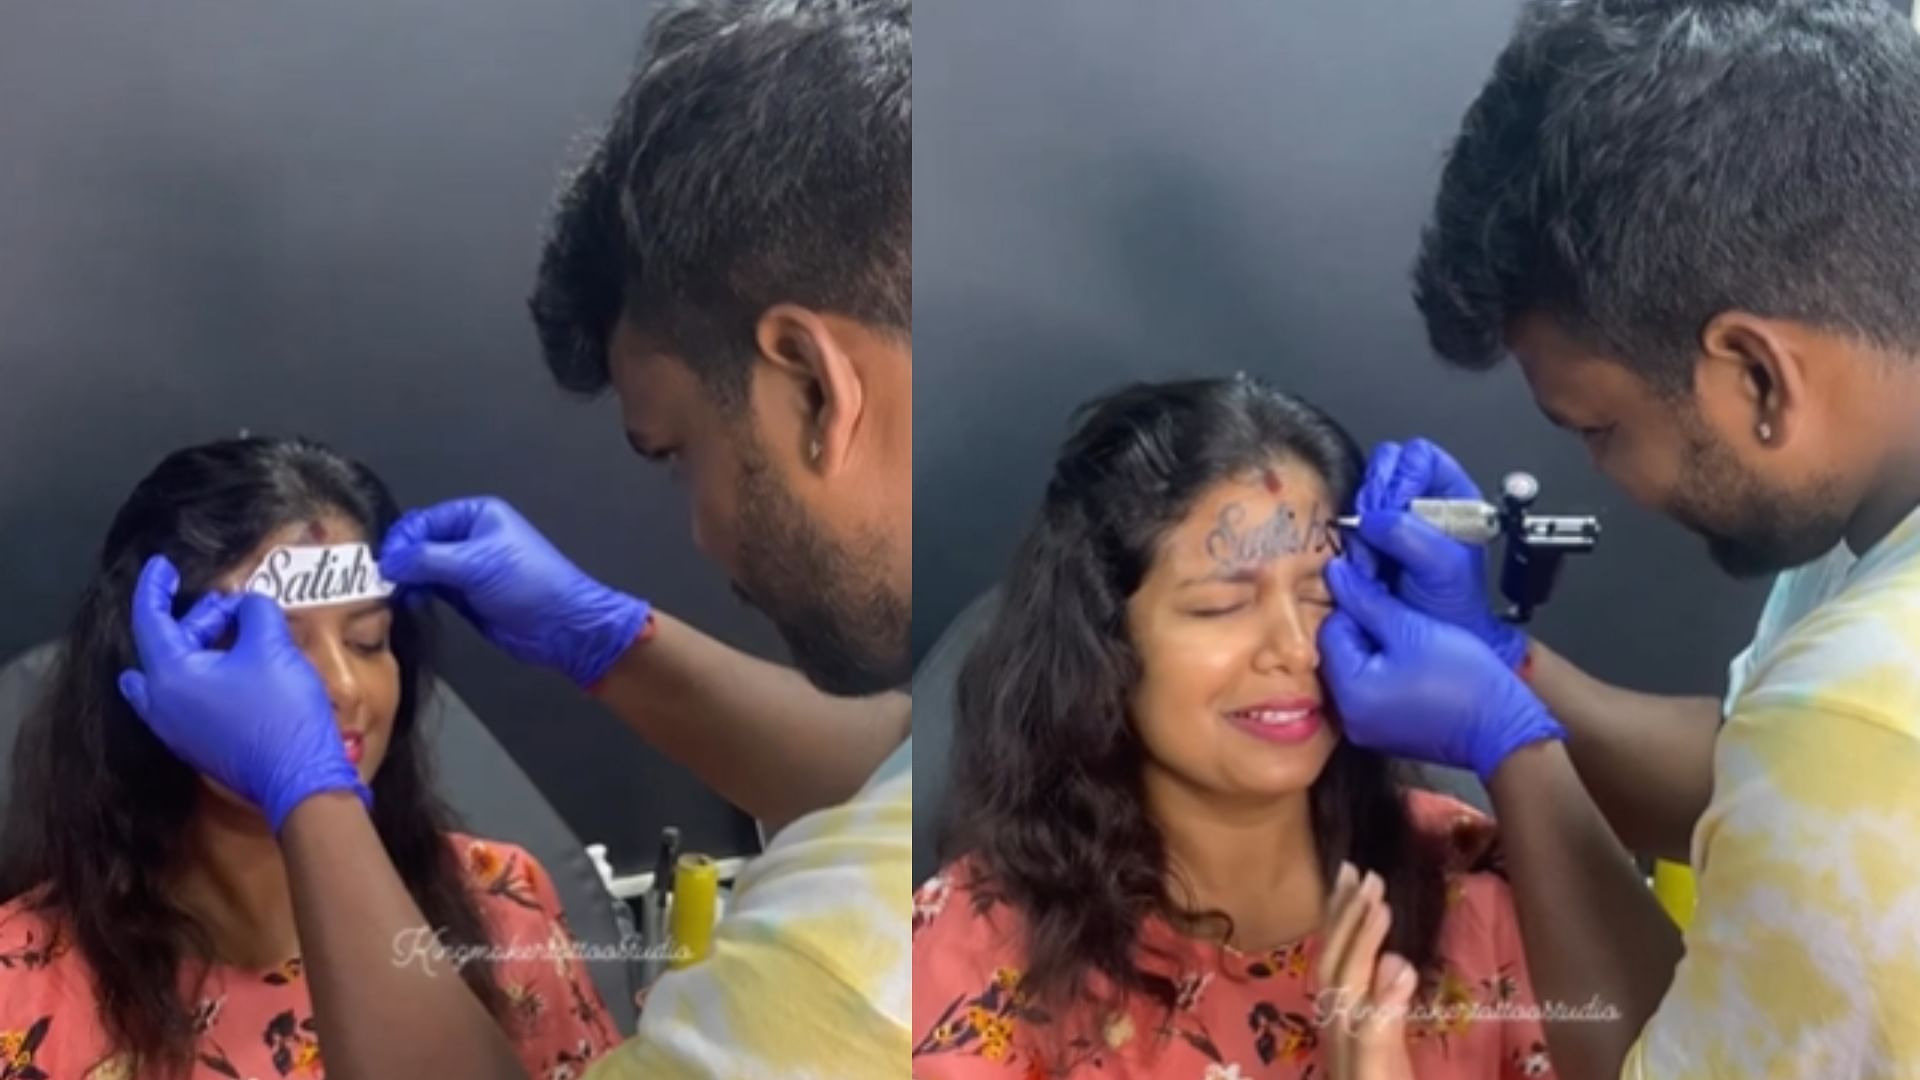 True Love Wife got husbands name tattooed on her forehead video went viral on social media